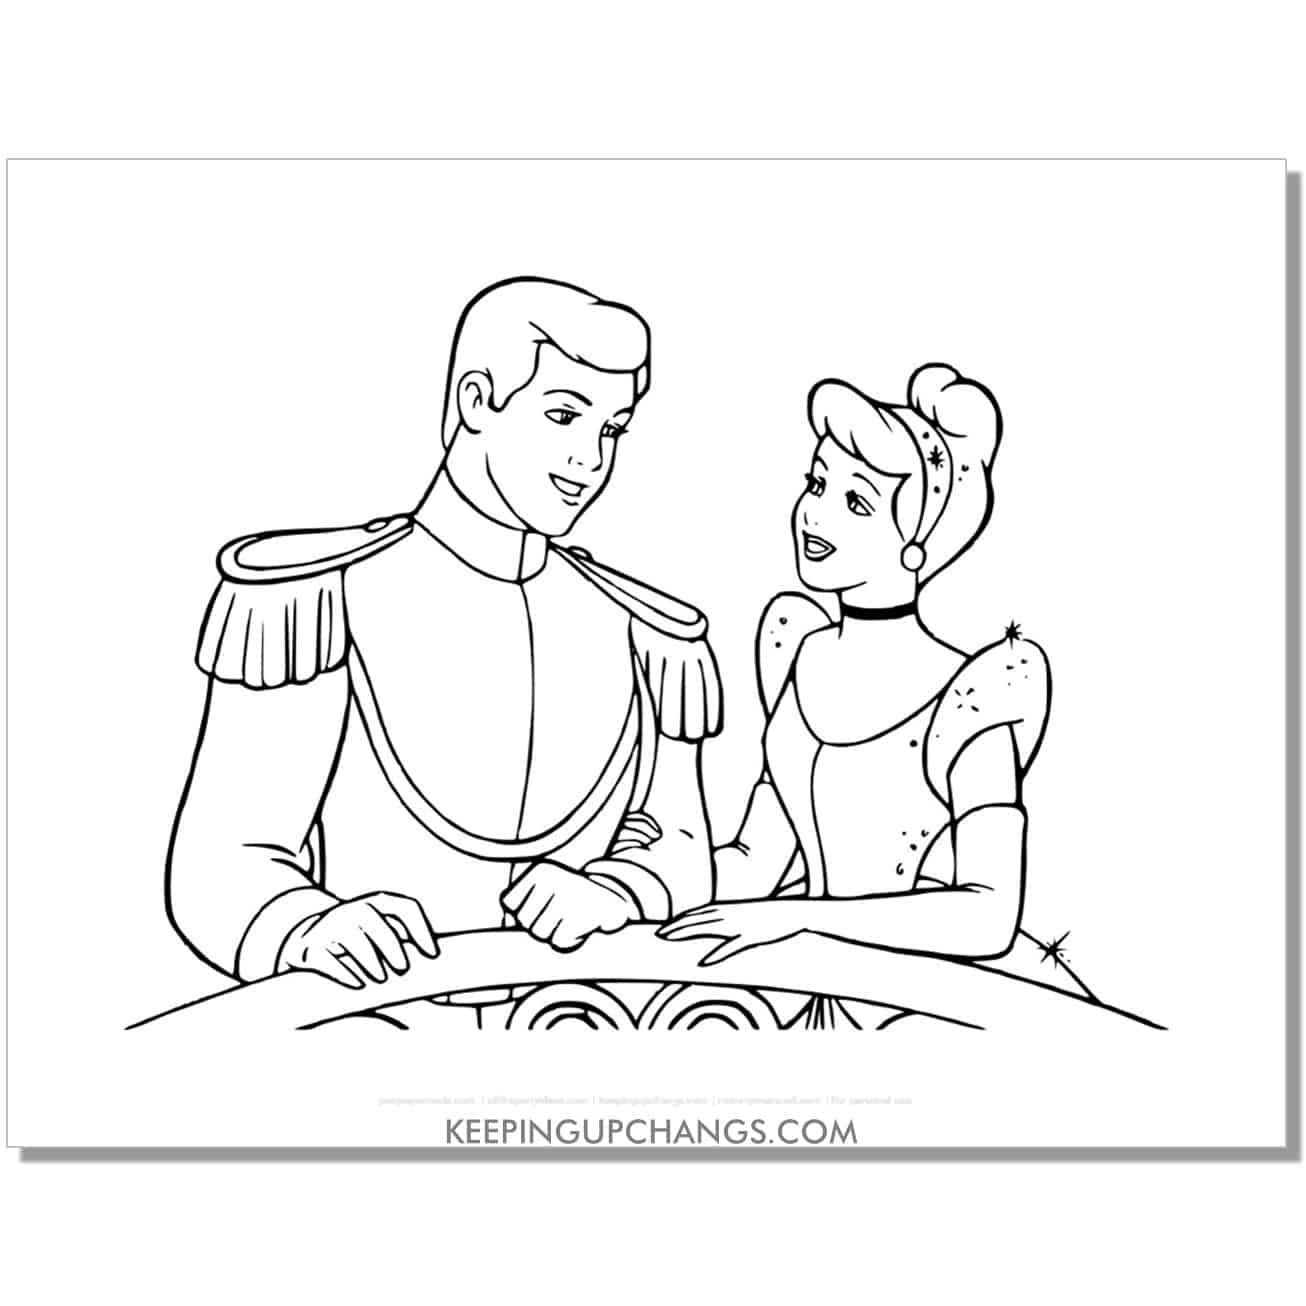 cinderella and prince charming on a balcony coloring page, sheet.